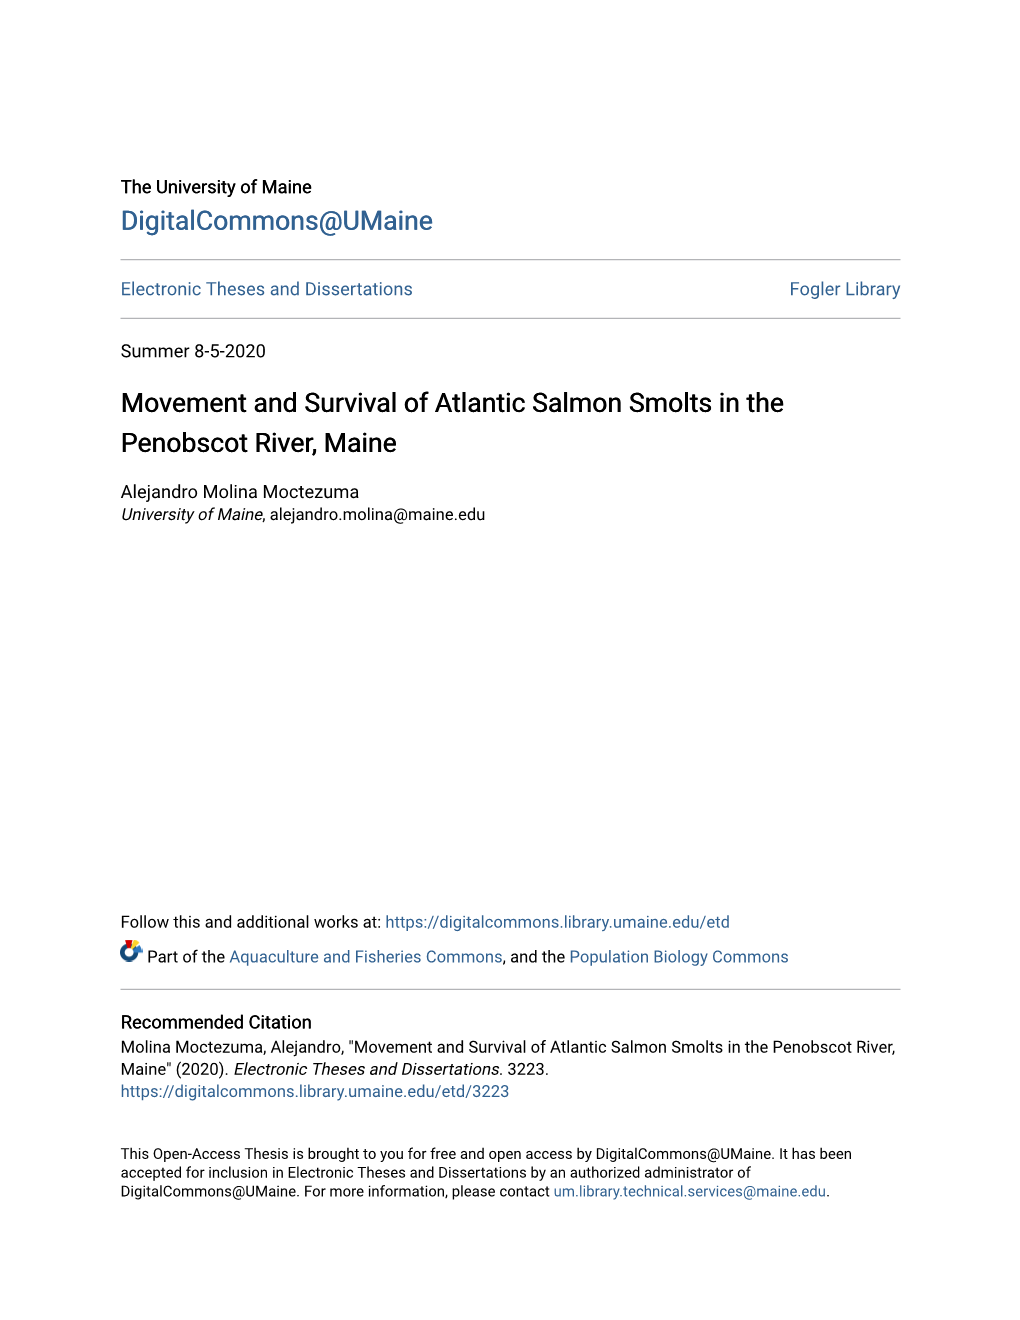 Movement and Survival of Atlantic Salmon Smolts in the Penobscot River, Maine